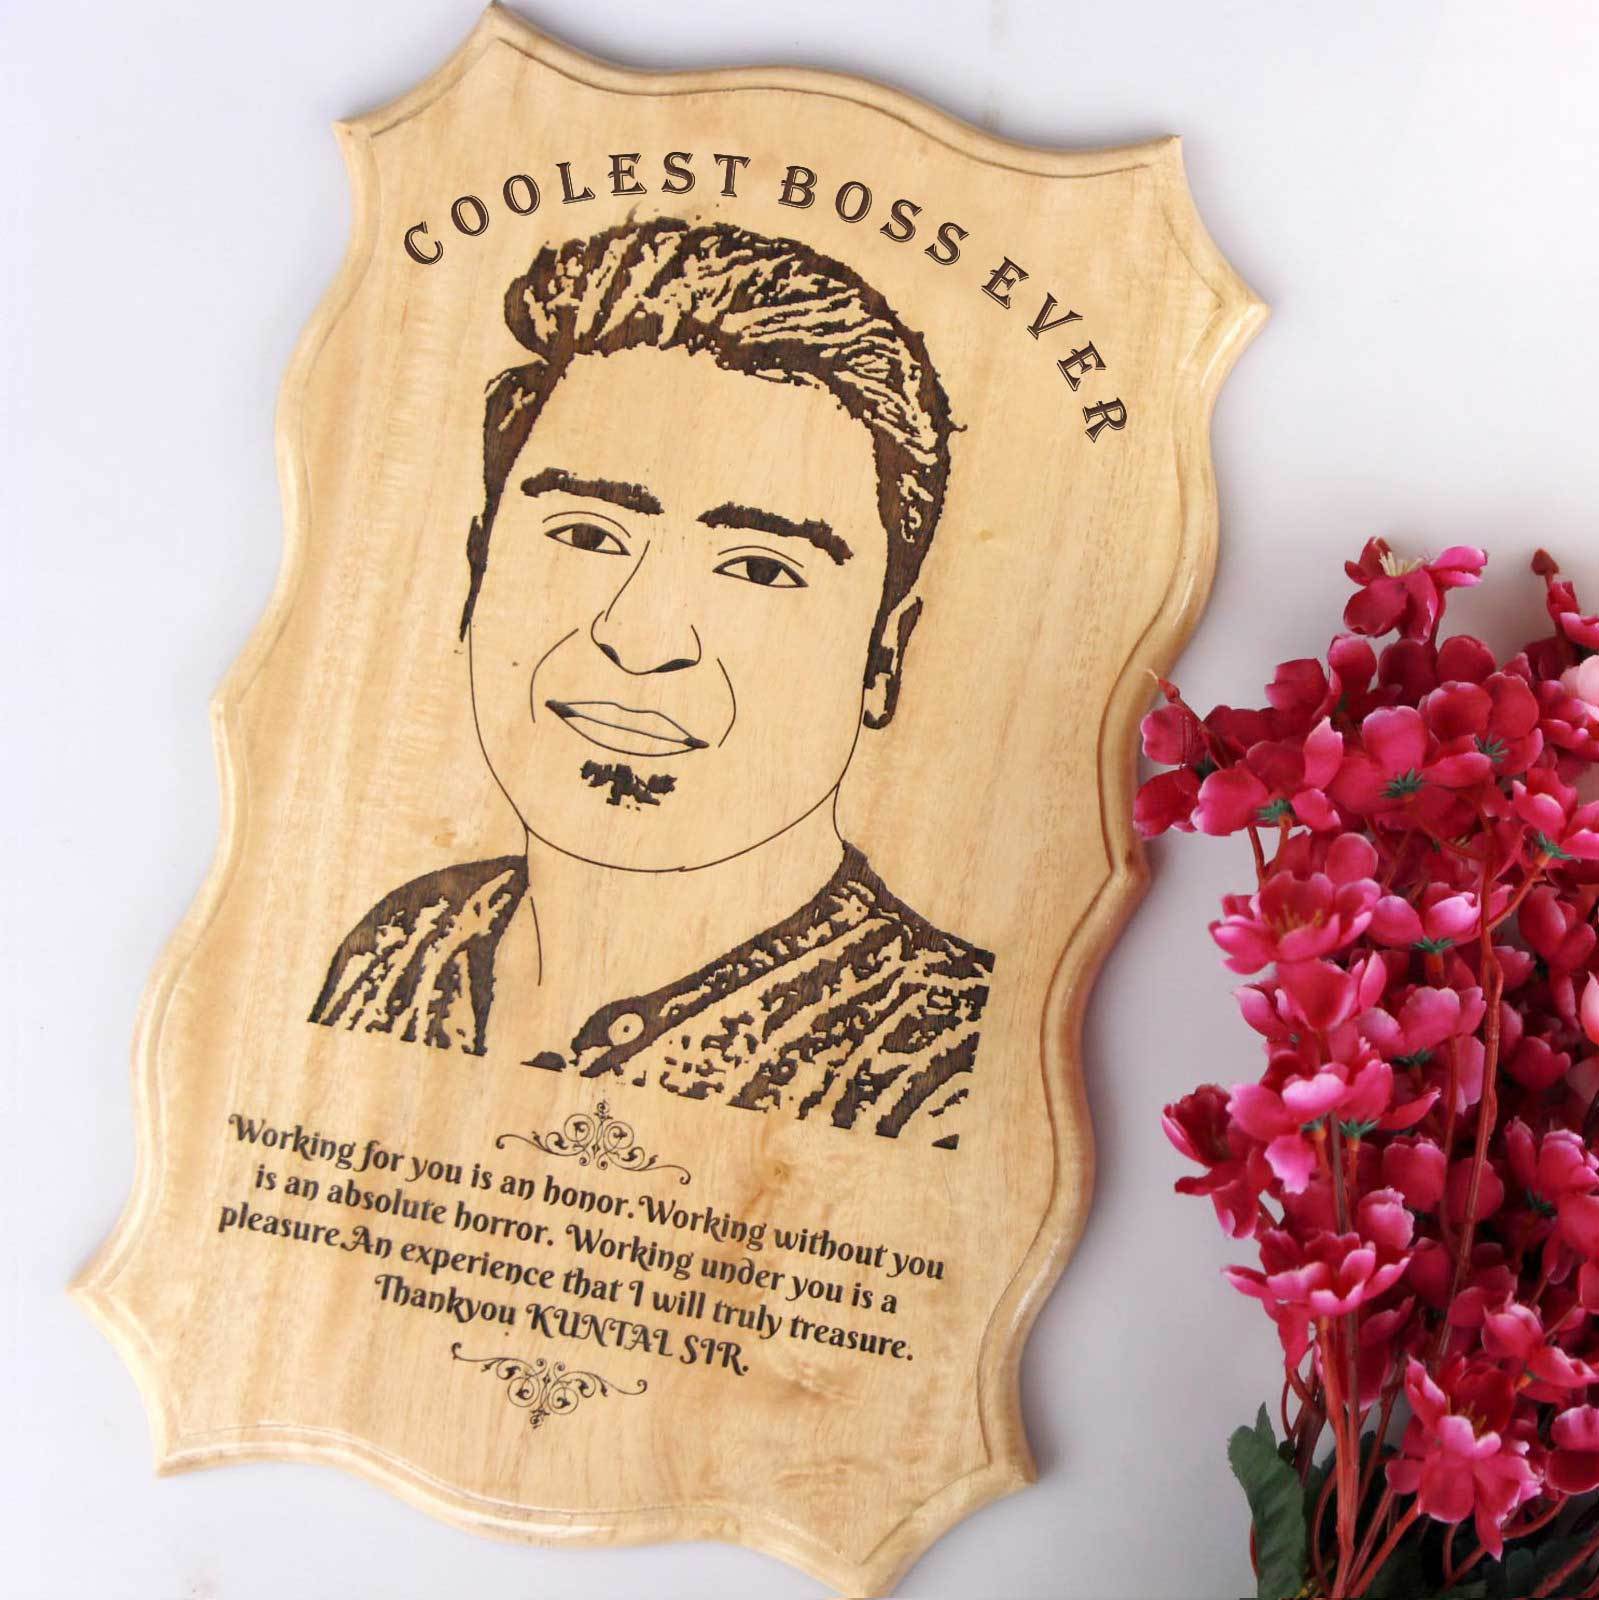 Coolest Boss Ever Photo-Engraved Wooden Plaque. These custom wood signs make great gifts for boss, farewell gift for boss, birthday gift for boss or gift for manager